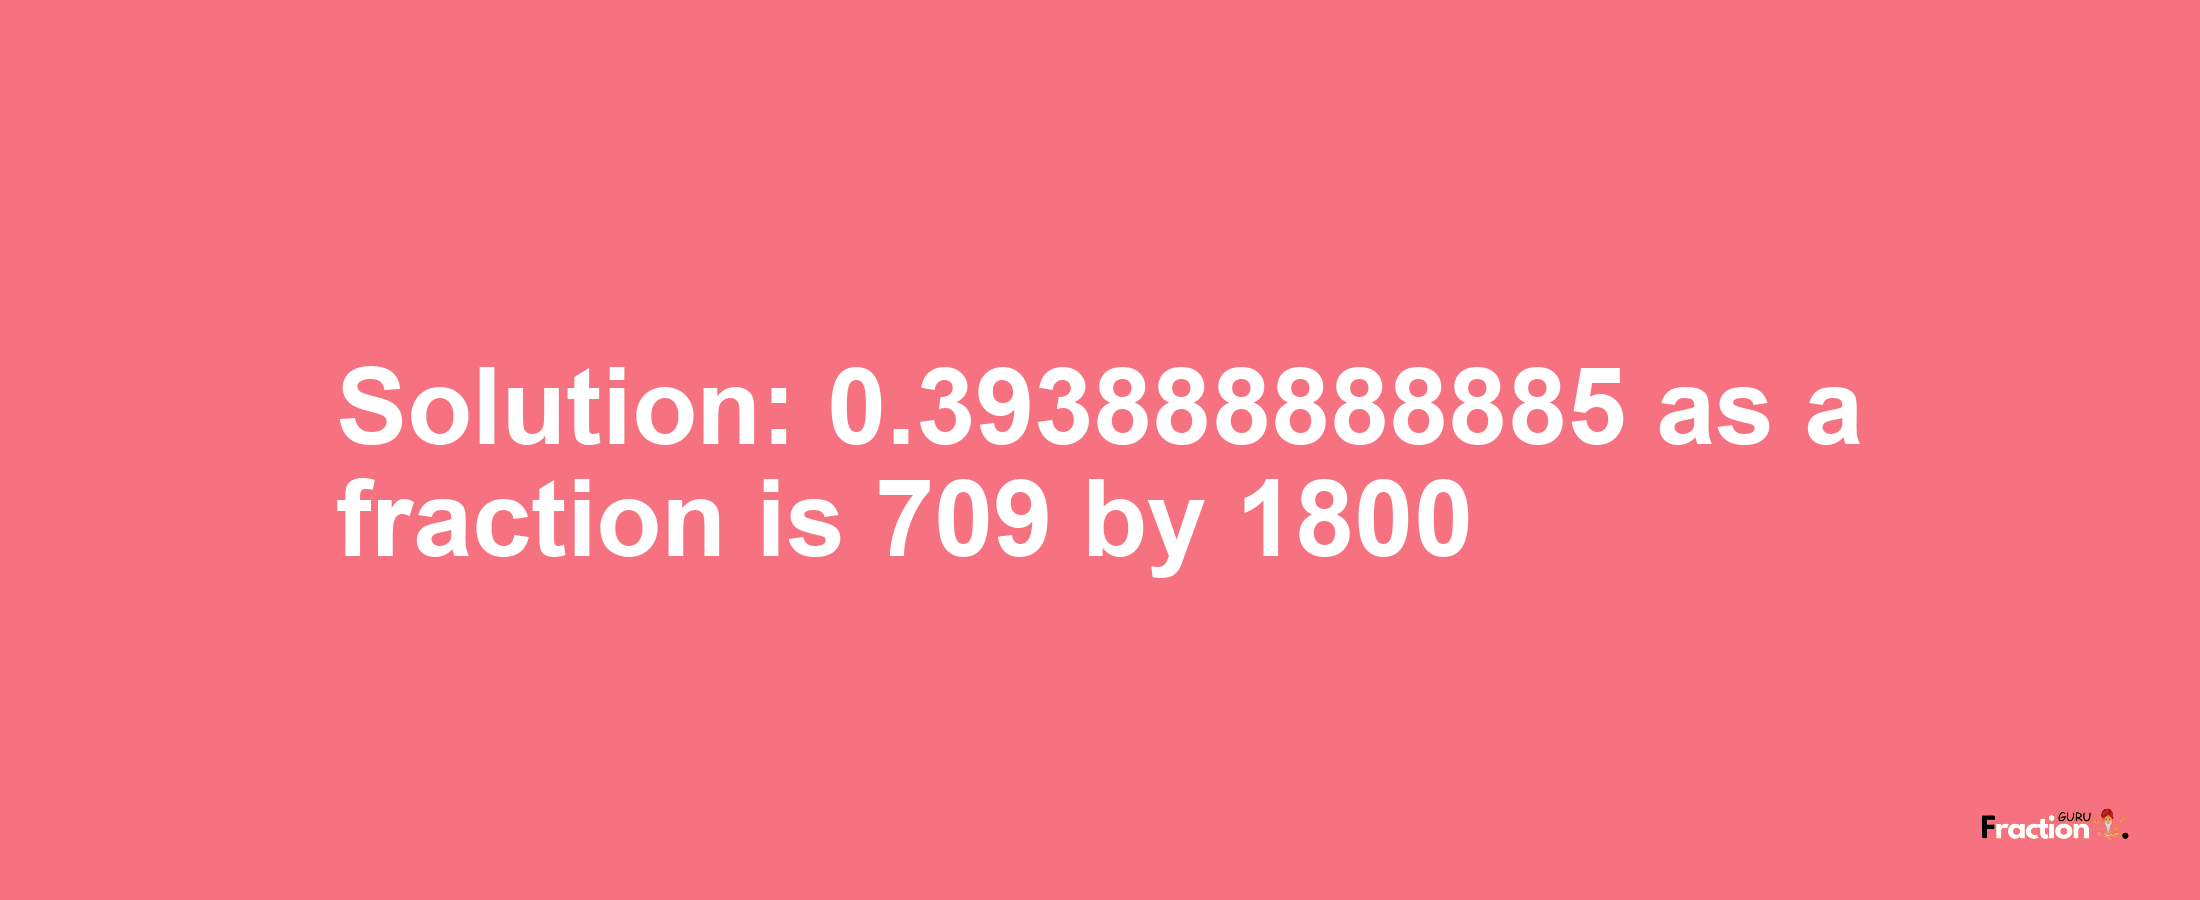 Solution:0.393888888885 as a fraction is 709/1800